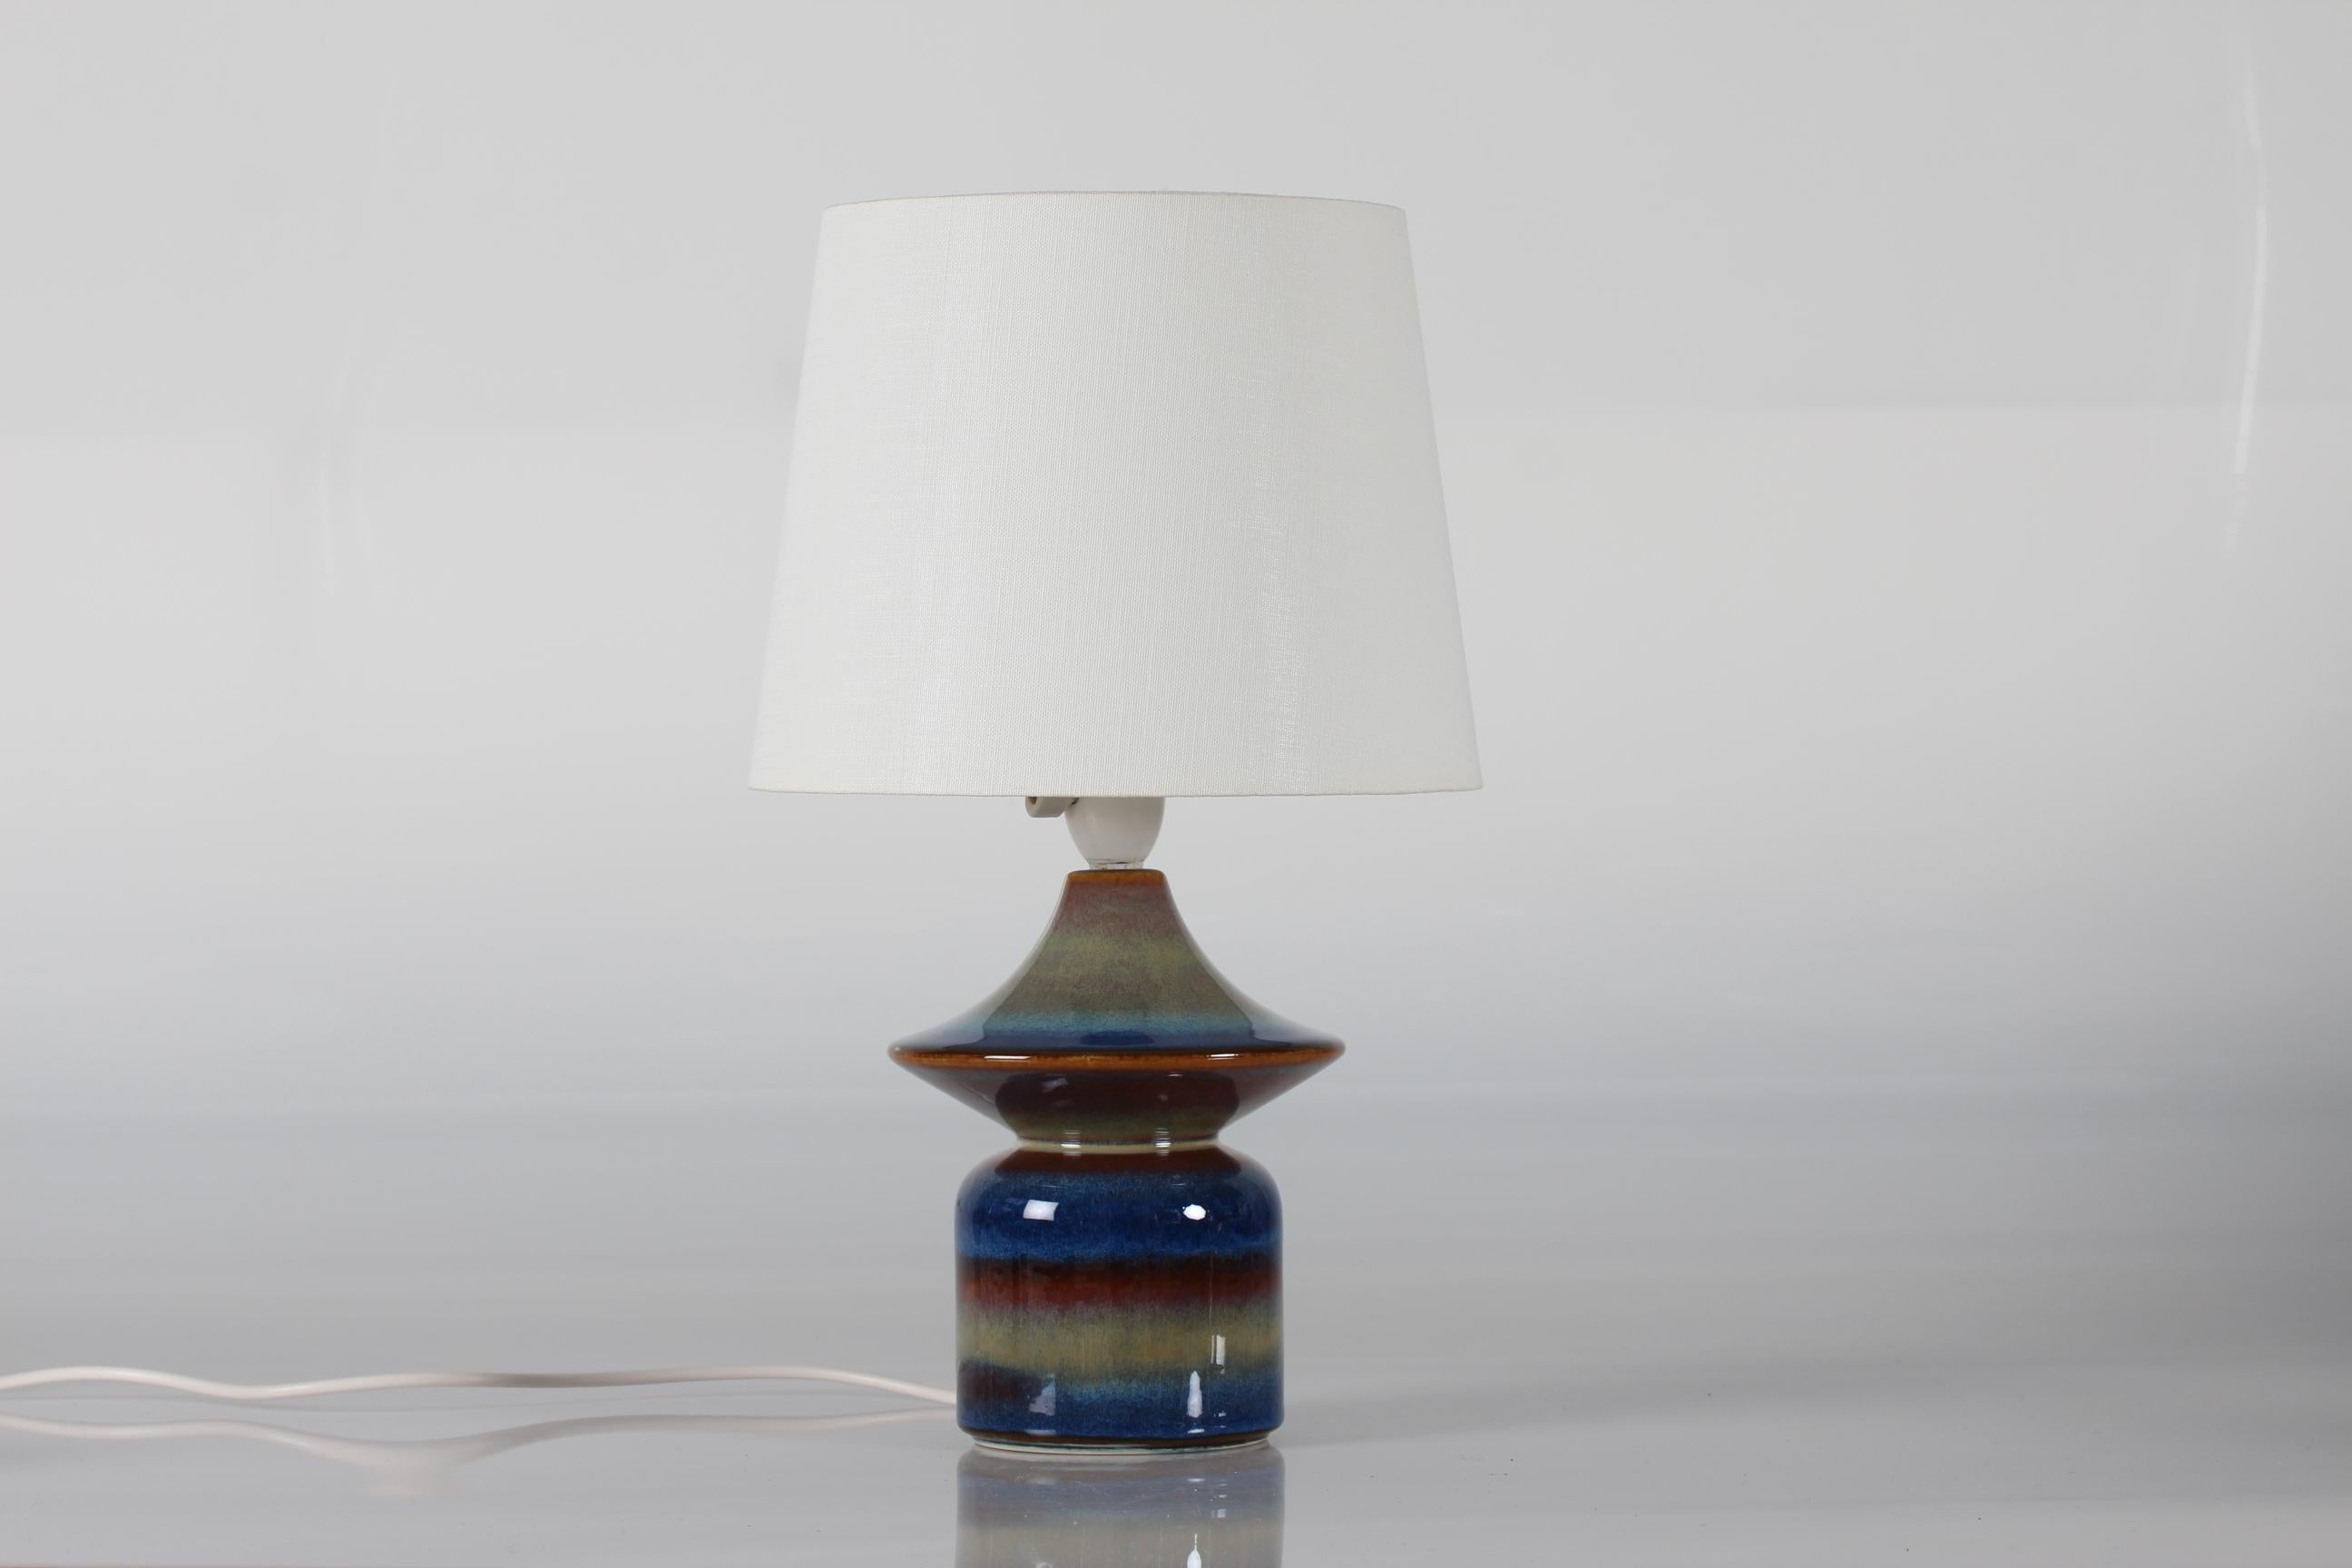 Small stylish and sculptural Danish midcentury table lamp made of ceramic with glaze in blue and green colors.
The lamp is made at the acknowledged pottery Søholm on Bornholm, circa 1960s.

The lamp remains in good vintage condition and comes